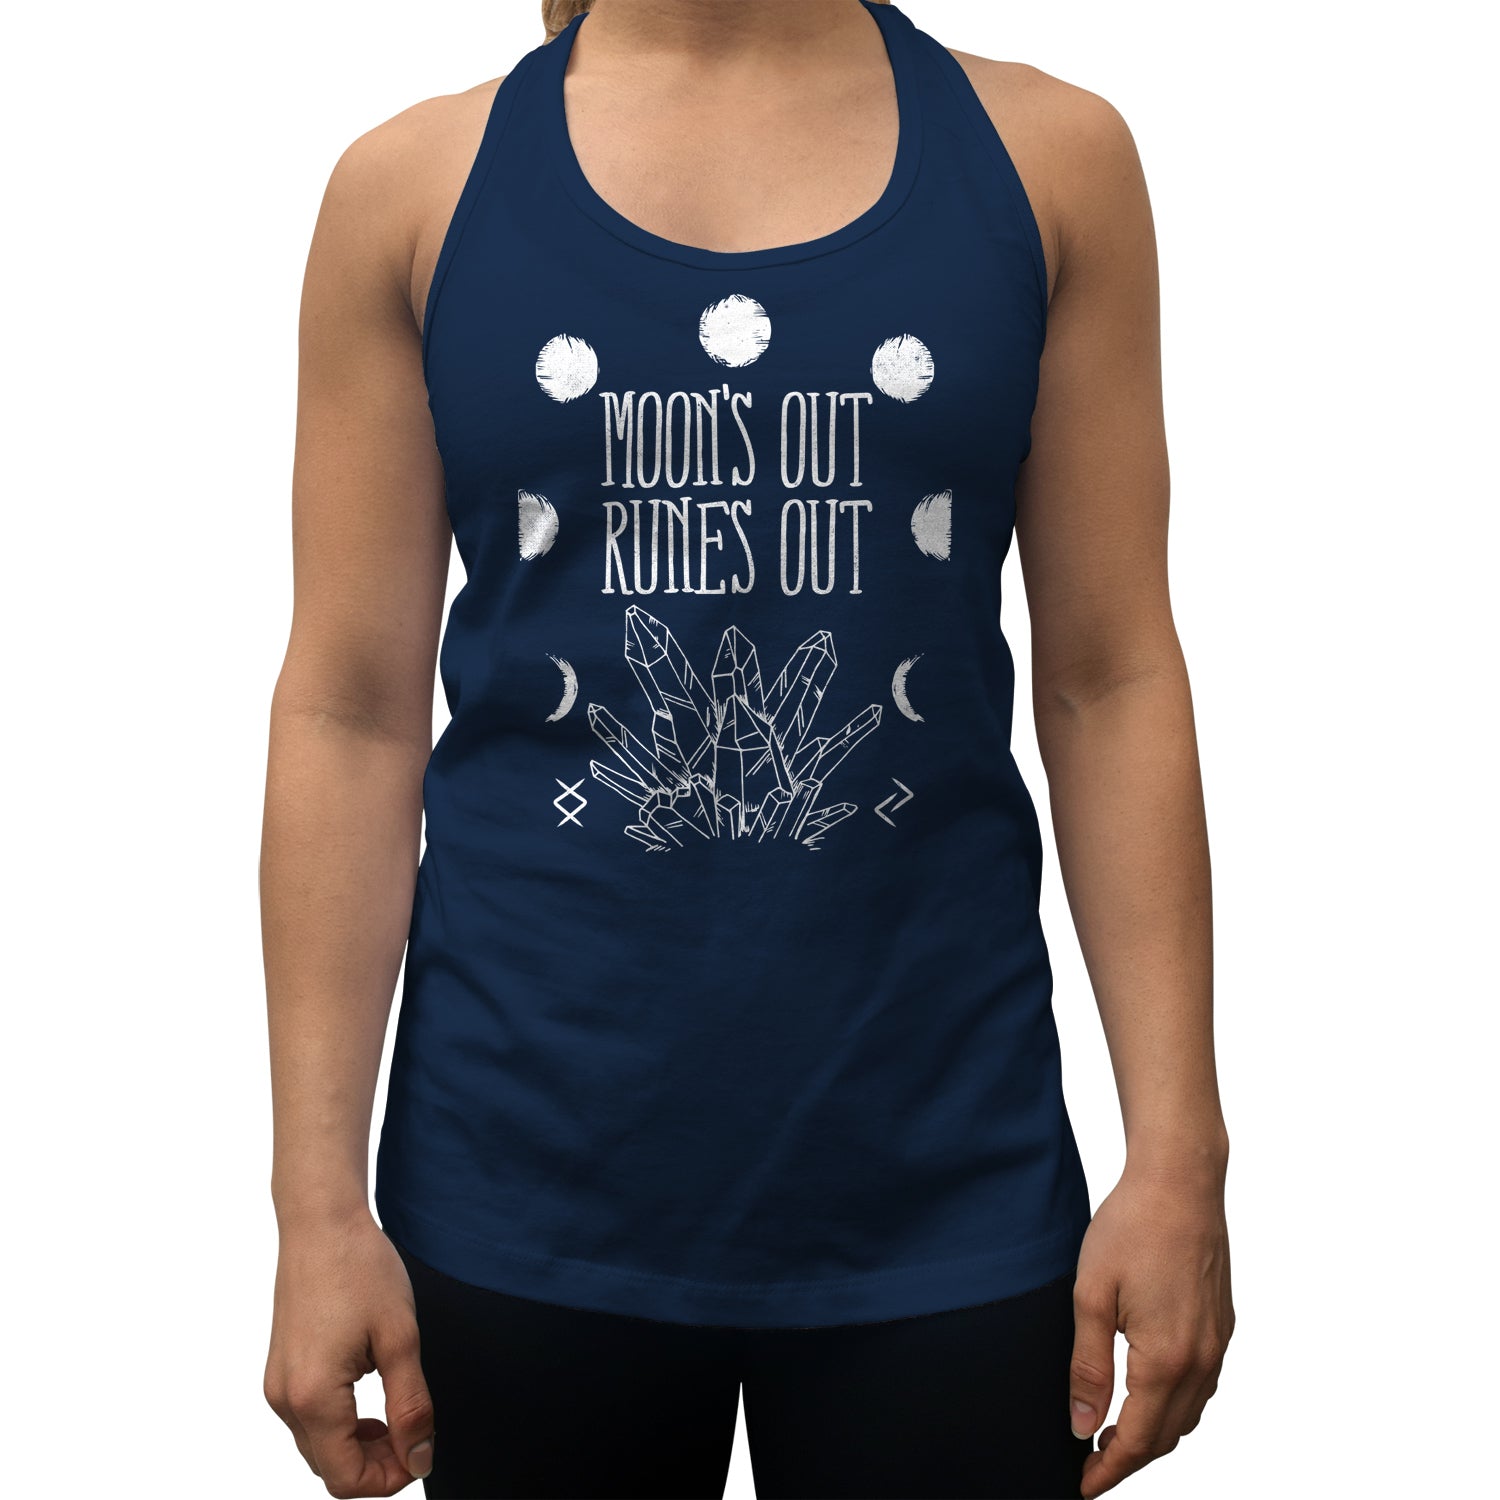 Women's Moon's Out Runes Out Racerback Tank Top